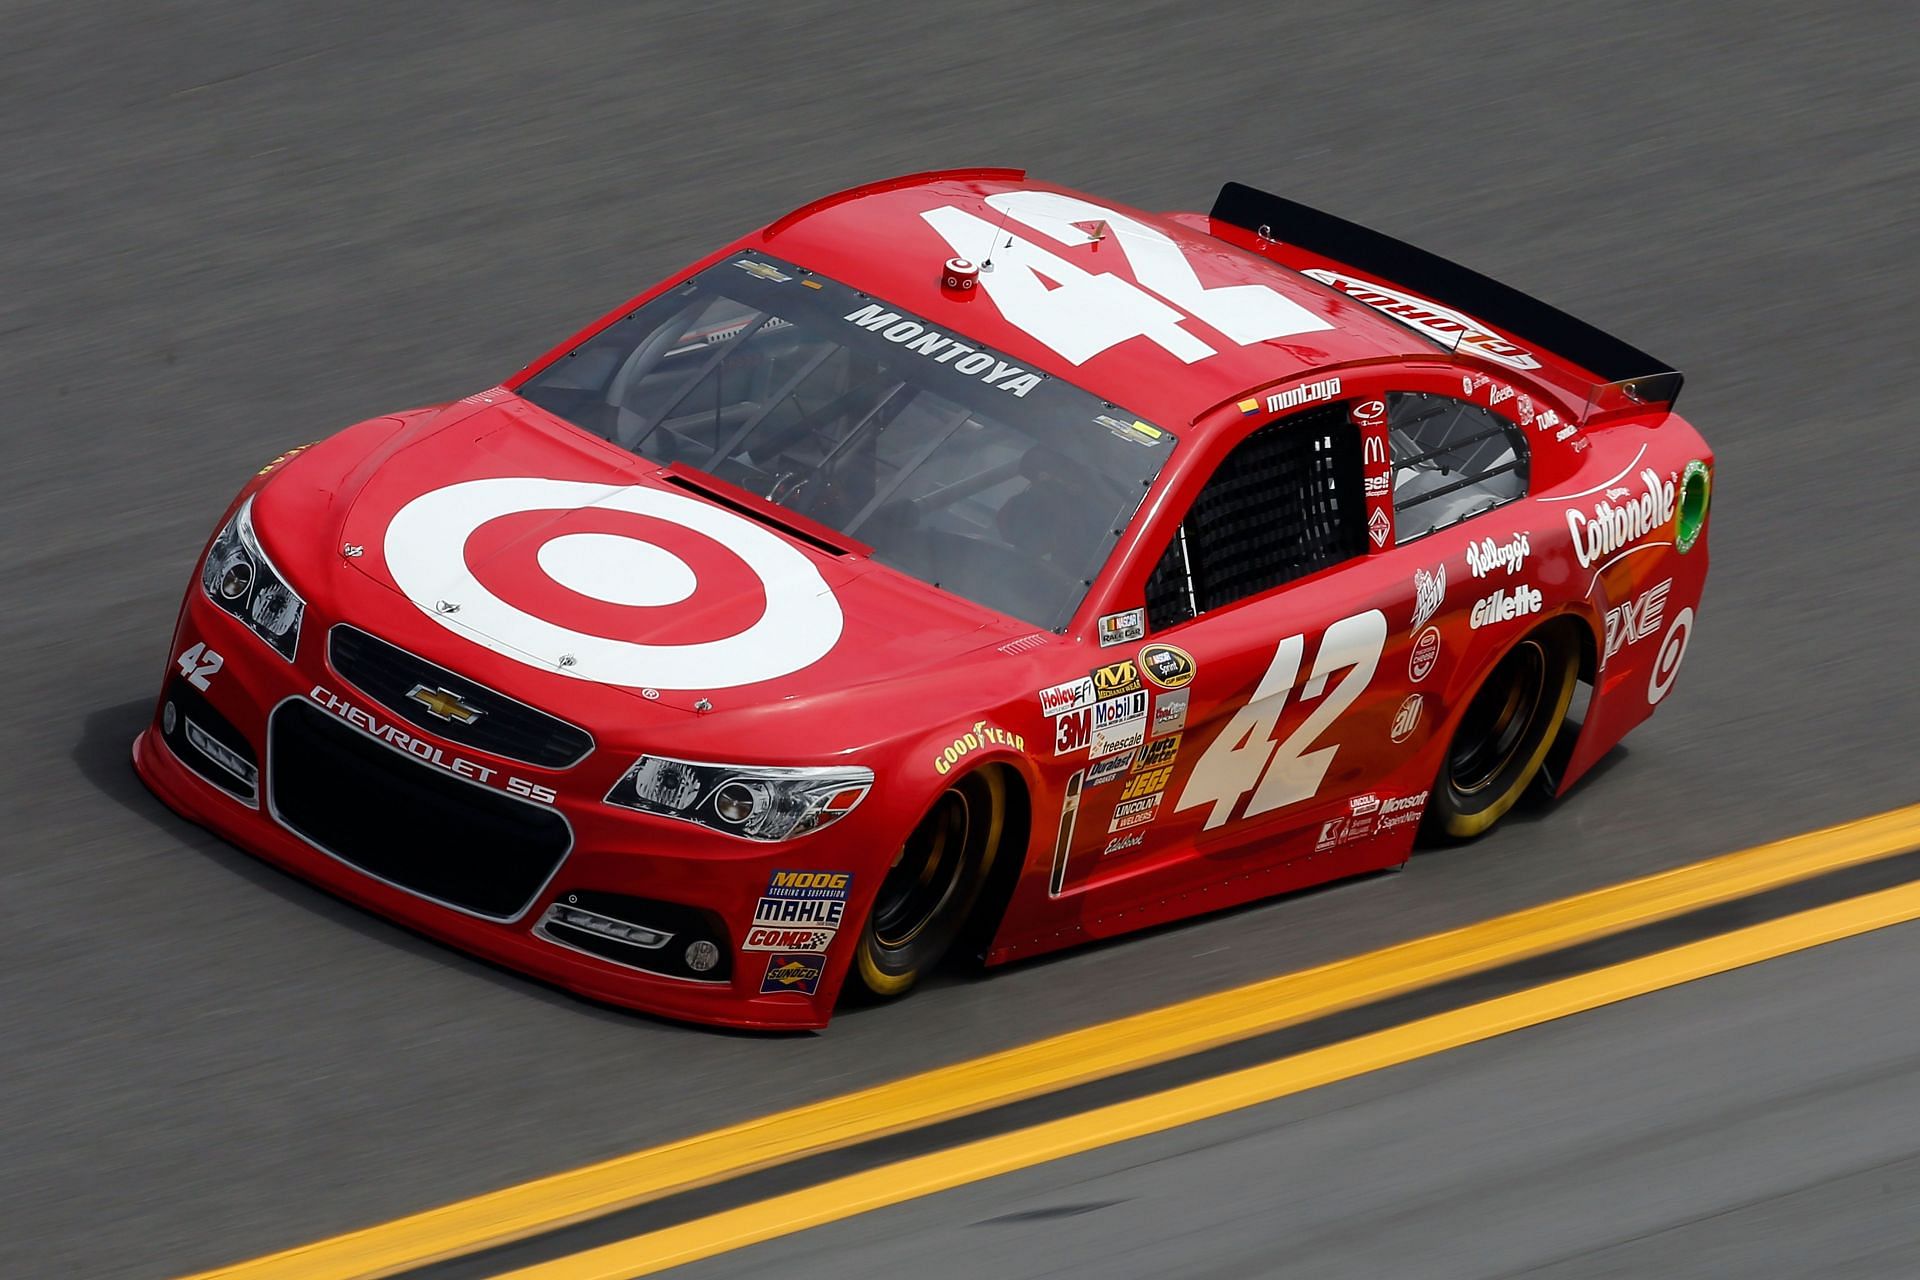 Juan Pablo Montoya during practice at the 2013 Daytona 500 in Florida (Photo by Chris Graythen/Getty Images)